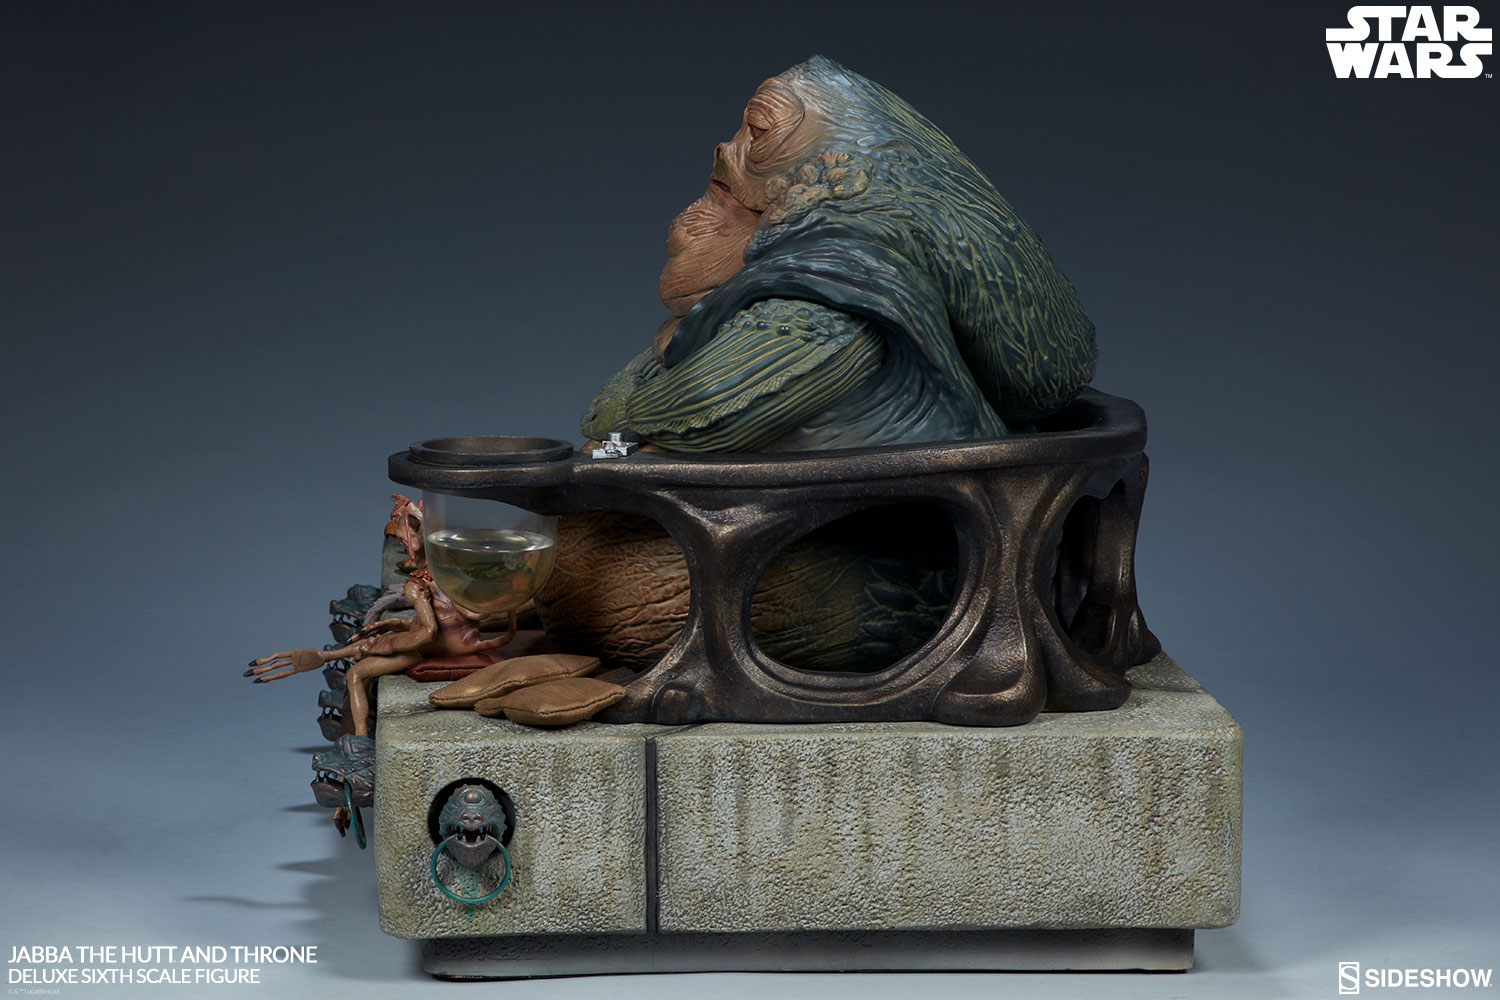 star-wars-jabba-the-hutt-and-throne-deluxe-sixth-scale-figure-sideshow-100410-12.jpg